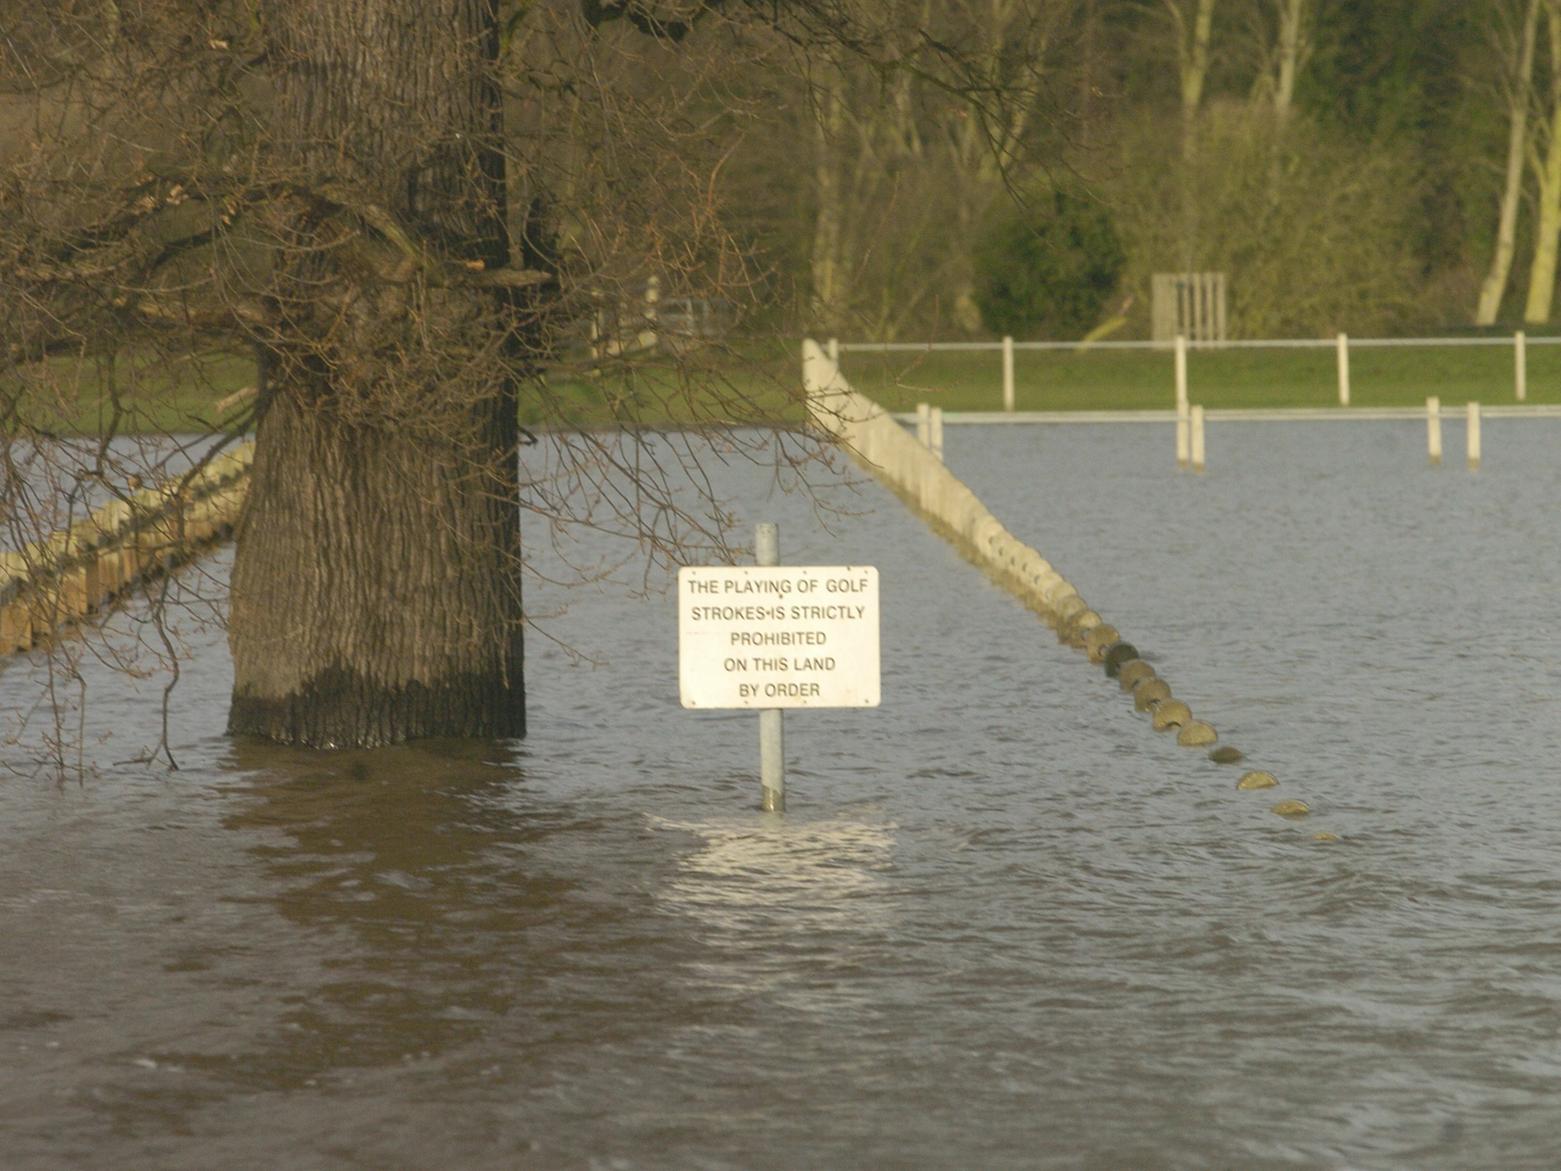 The day rain stopped play. Flooded sports pitches at Wetherby.